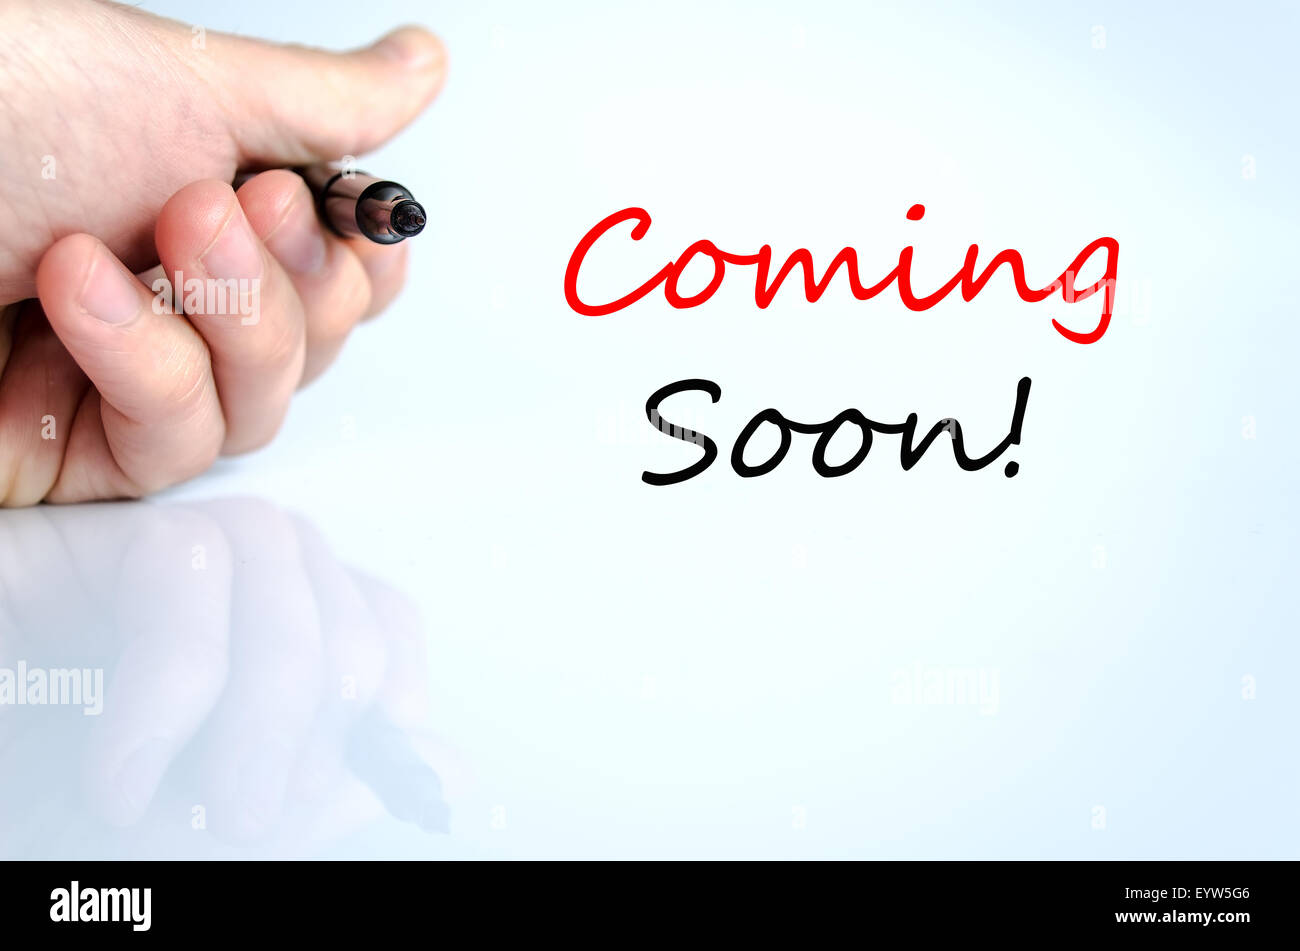 Coming soon text concept isolated over white background Stock Photo